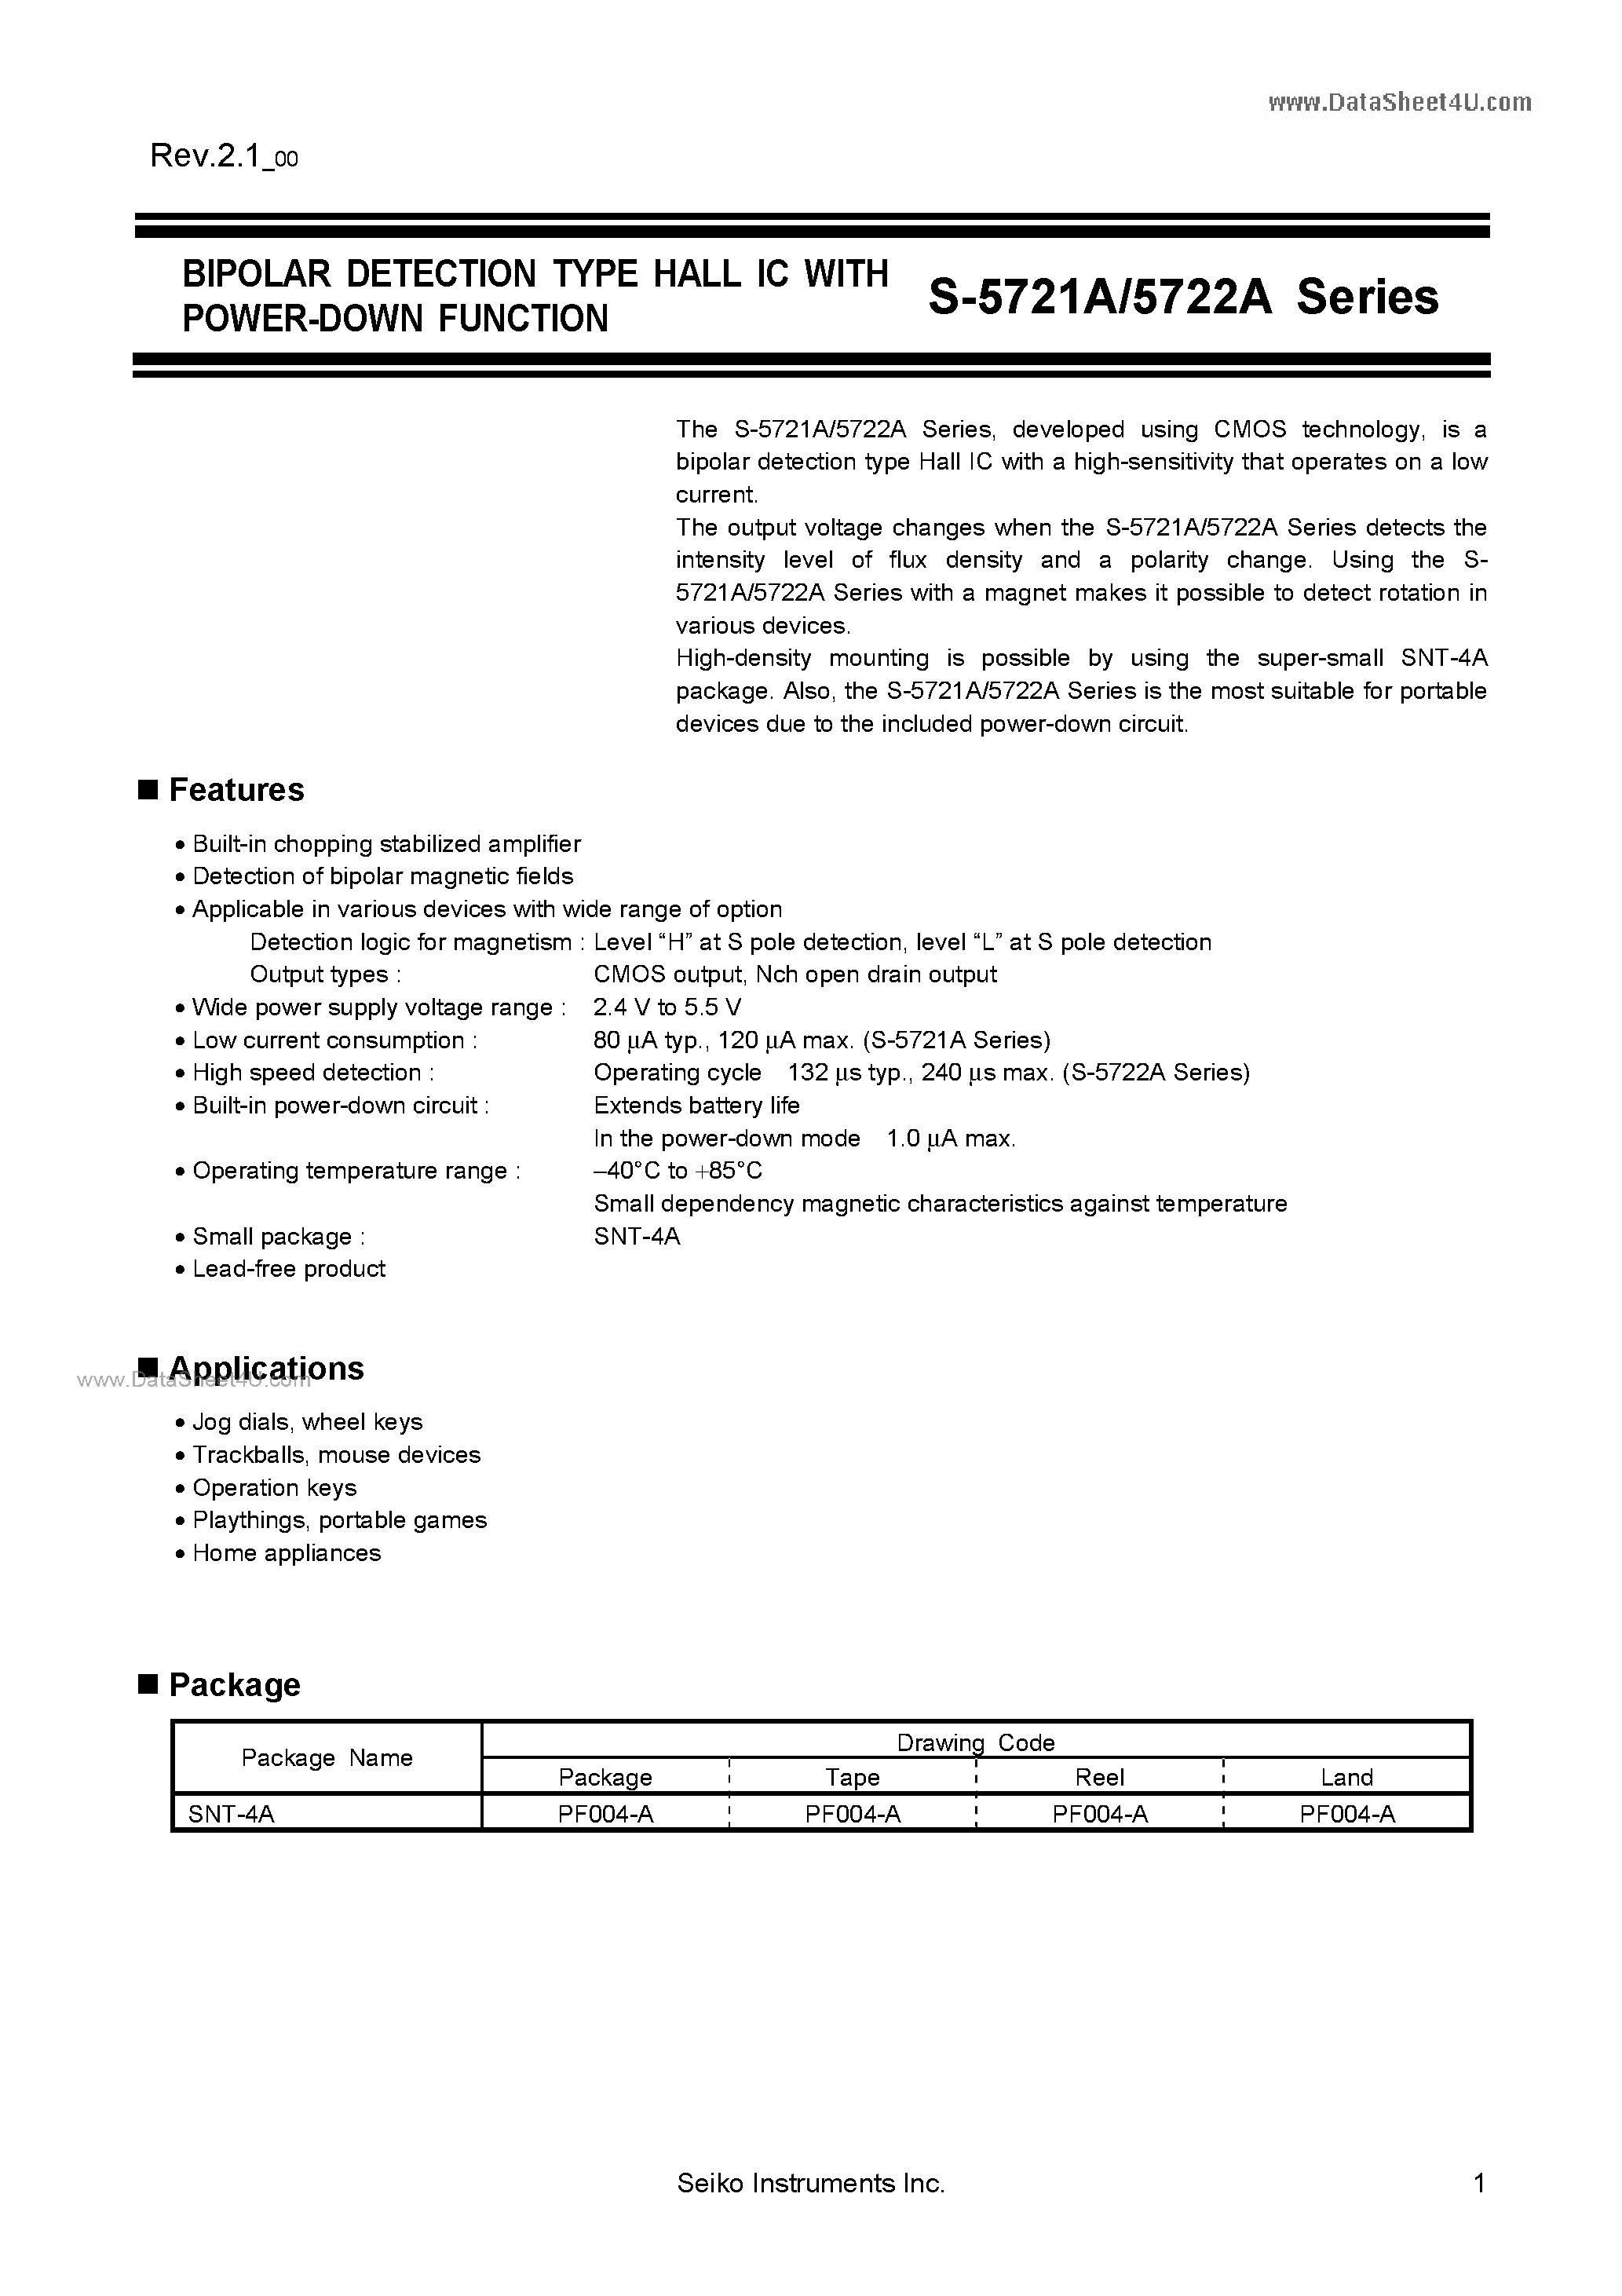 Datasheet S-5721A - (S-5721A / S-5722A) BIPOLAR DETECTION TYPE HALL IC page 1